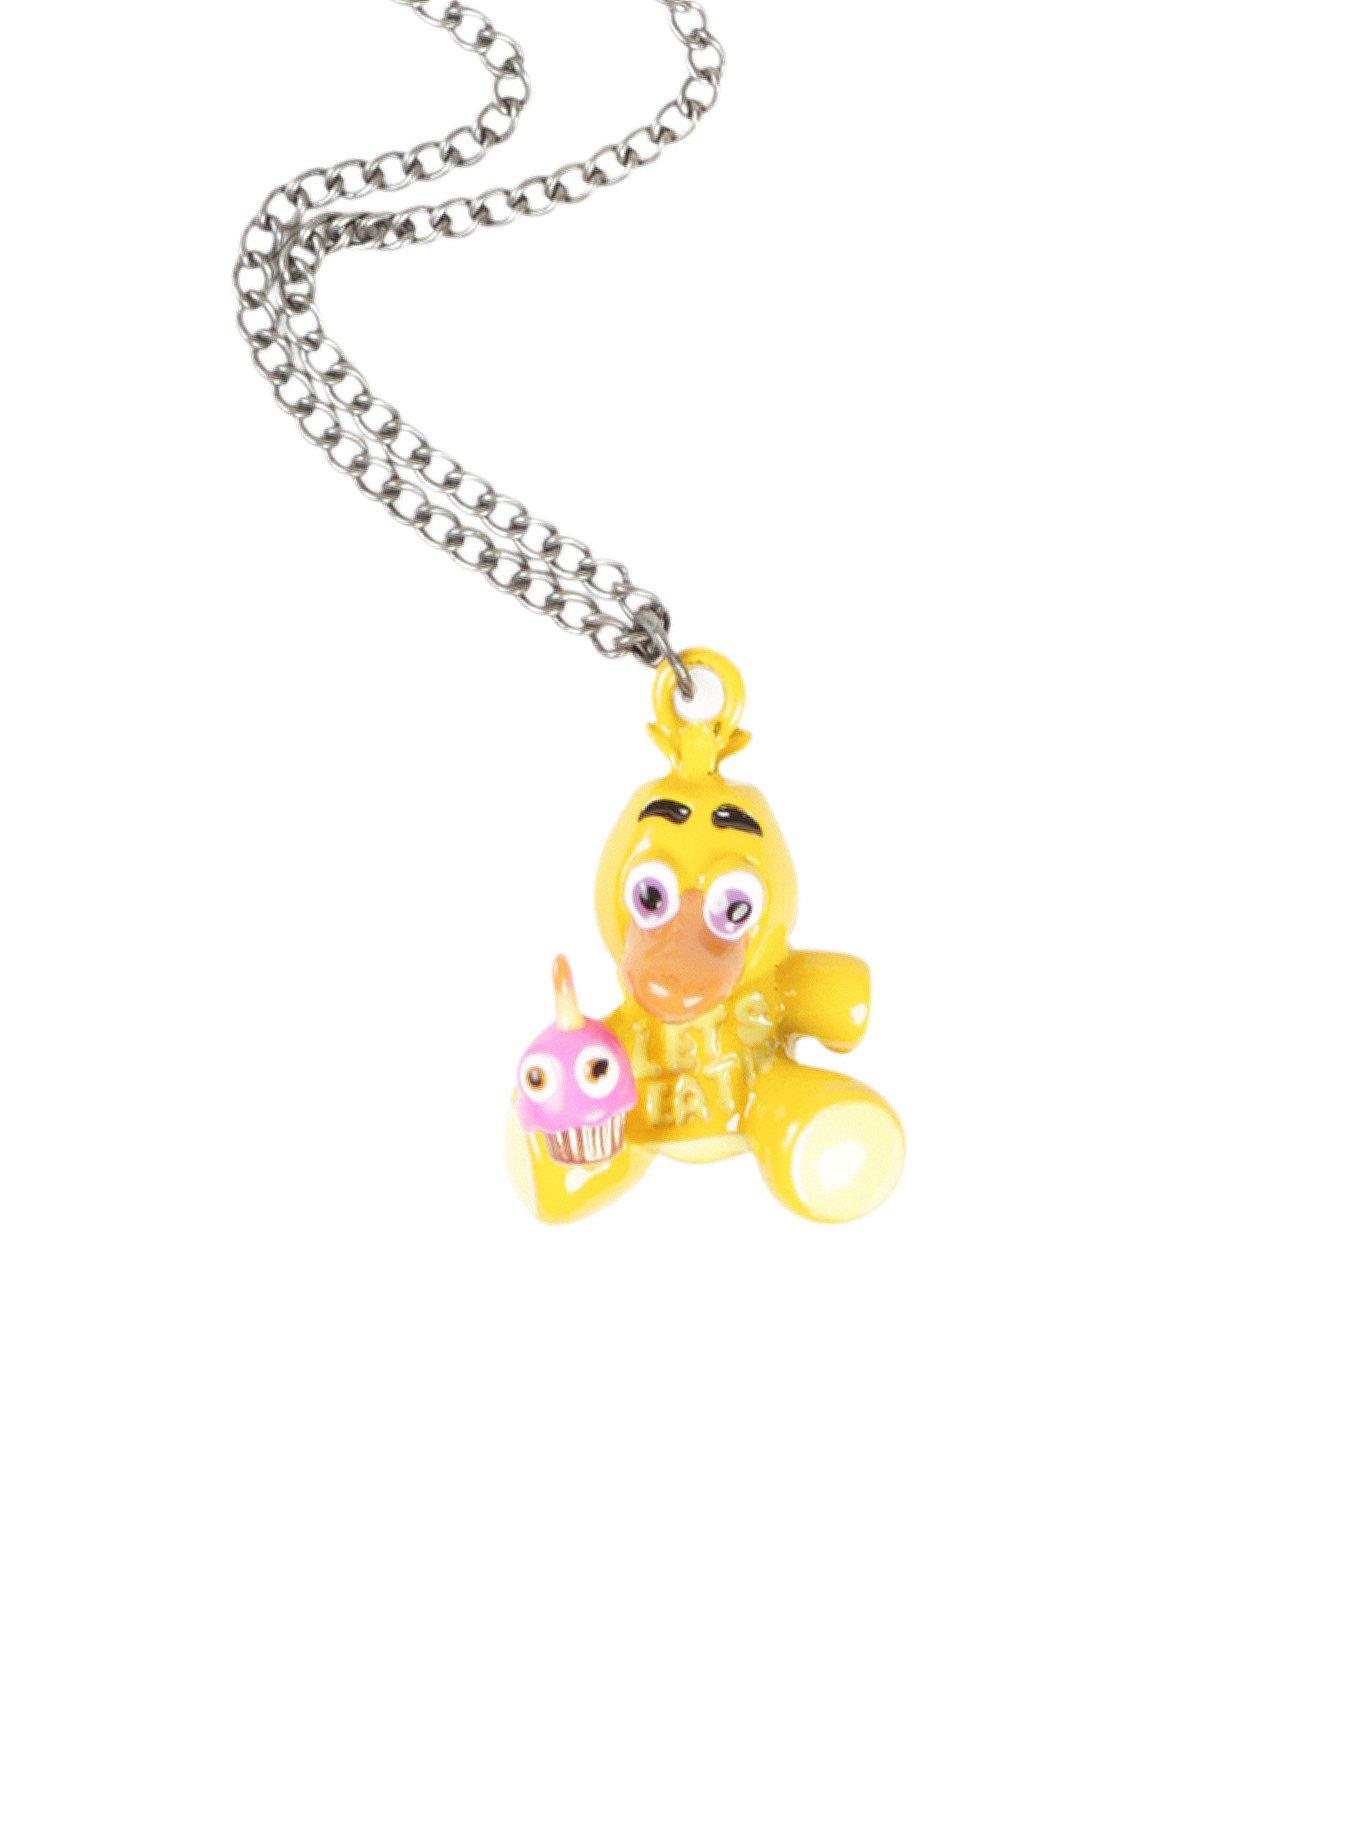 Anime Game Fnaf Freddy Necklace Foxy Bonnie Animal Doll Figures Pendant Necklace Jewelry Accessories